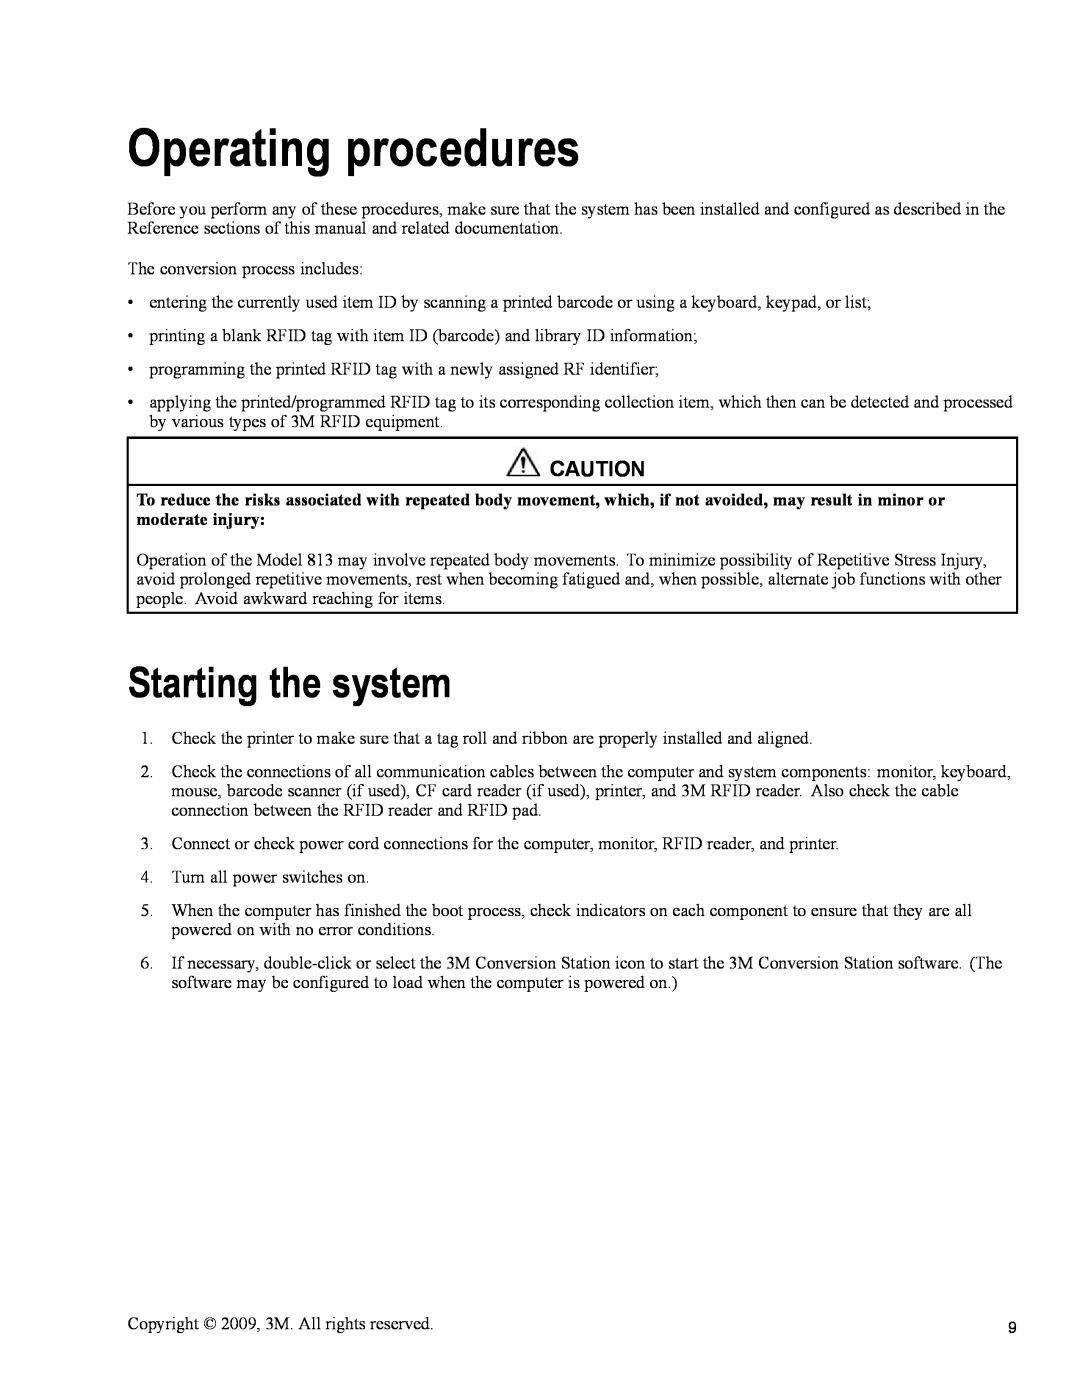 3M 813 owner manual Operating procedures, Starting the system 